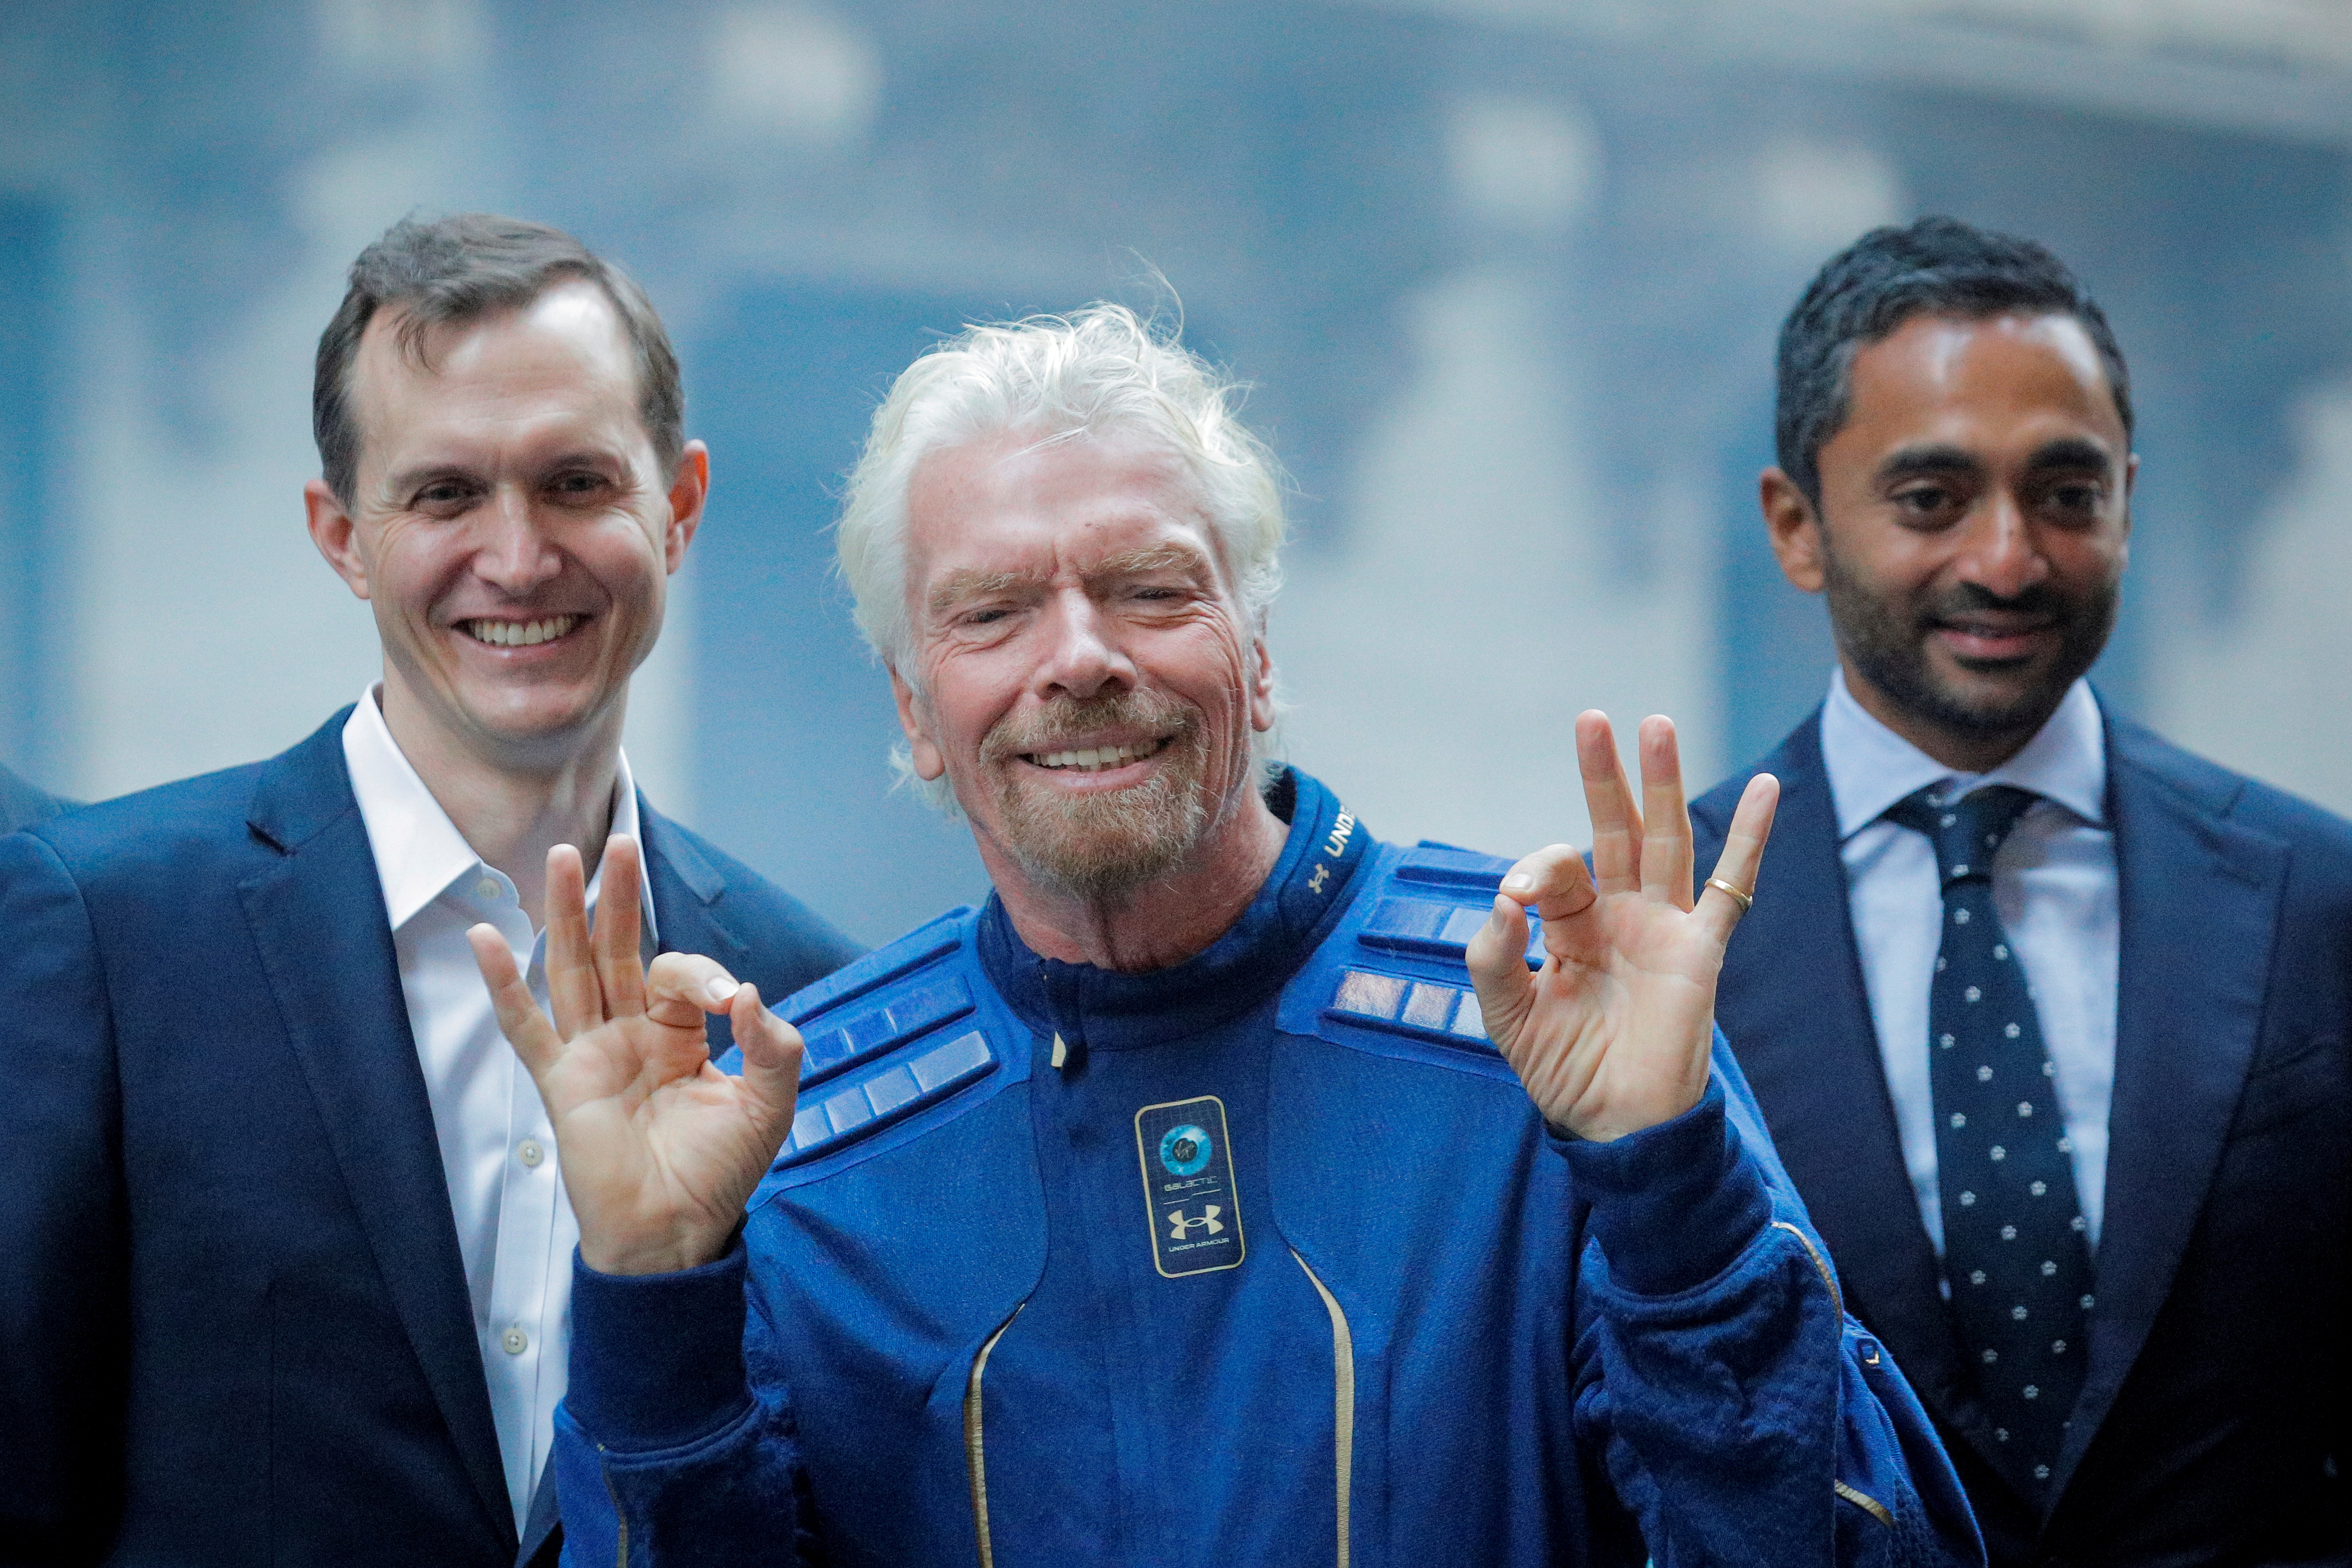 Virgin Galactic co-founder Sir Richard Branson, CEO George Whitesides and Social Capital CEO Chamath Palihapitiya pose together outside of the New York Stock Exchange n New York, U.S., October 28, 2019. REUTERS/Brendan McDermid/File Photo